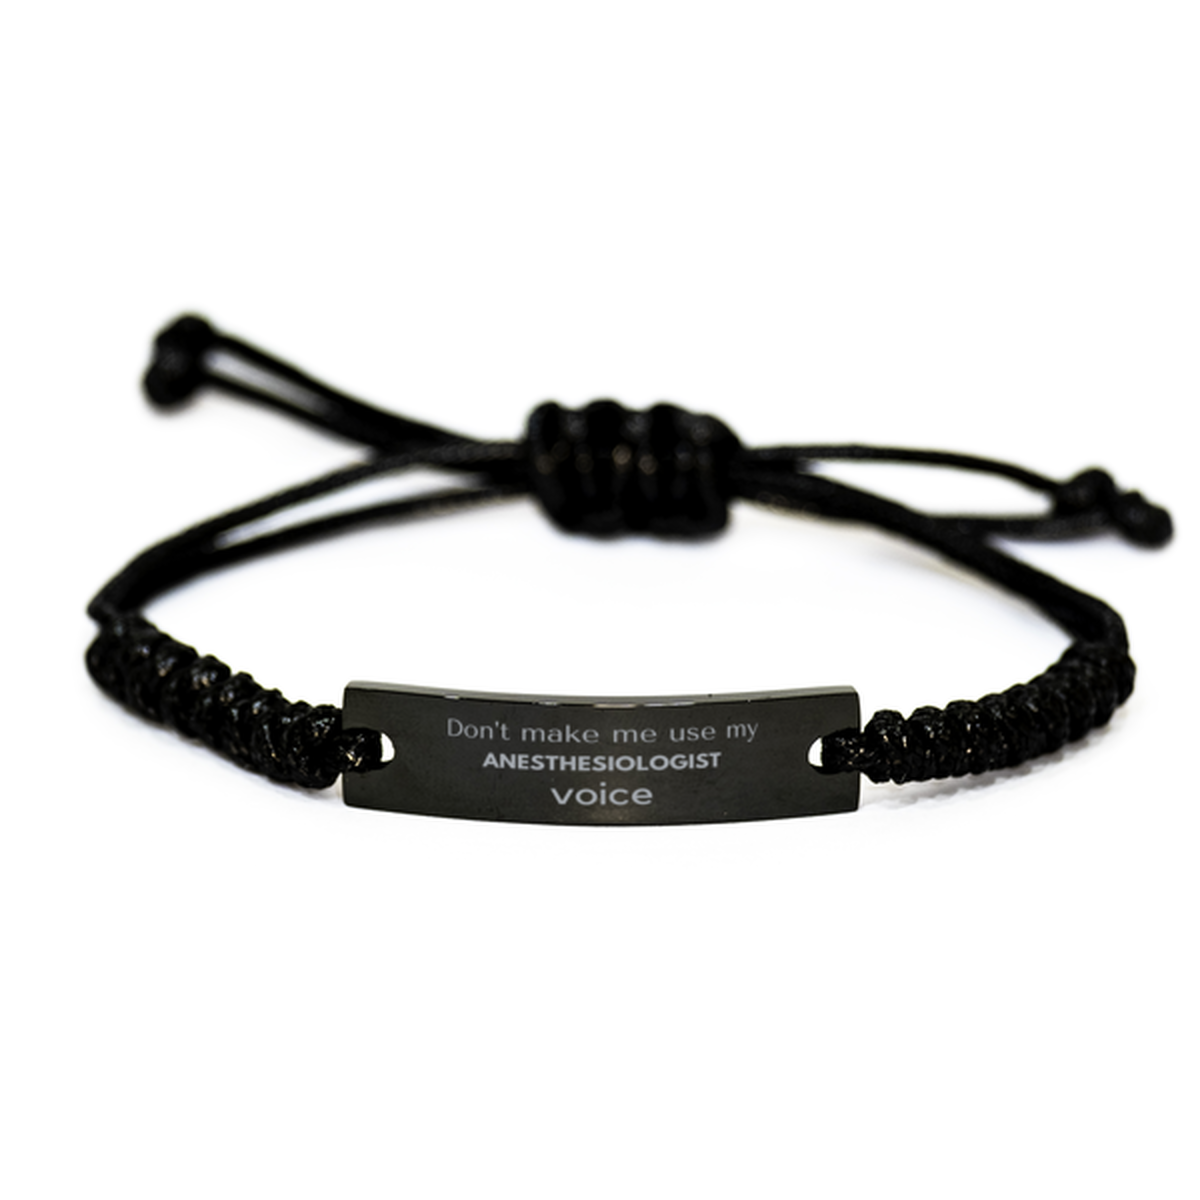 Don't make me use my Anesthesiologist voice, Sarcasm Anesthesiologist Gifts, Christmas Anesthesiologist Black Rope Bracelet Birthday Unique Gifts For Anesthesiologist Coworkers, Men, Women, Colleague, Friends